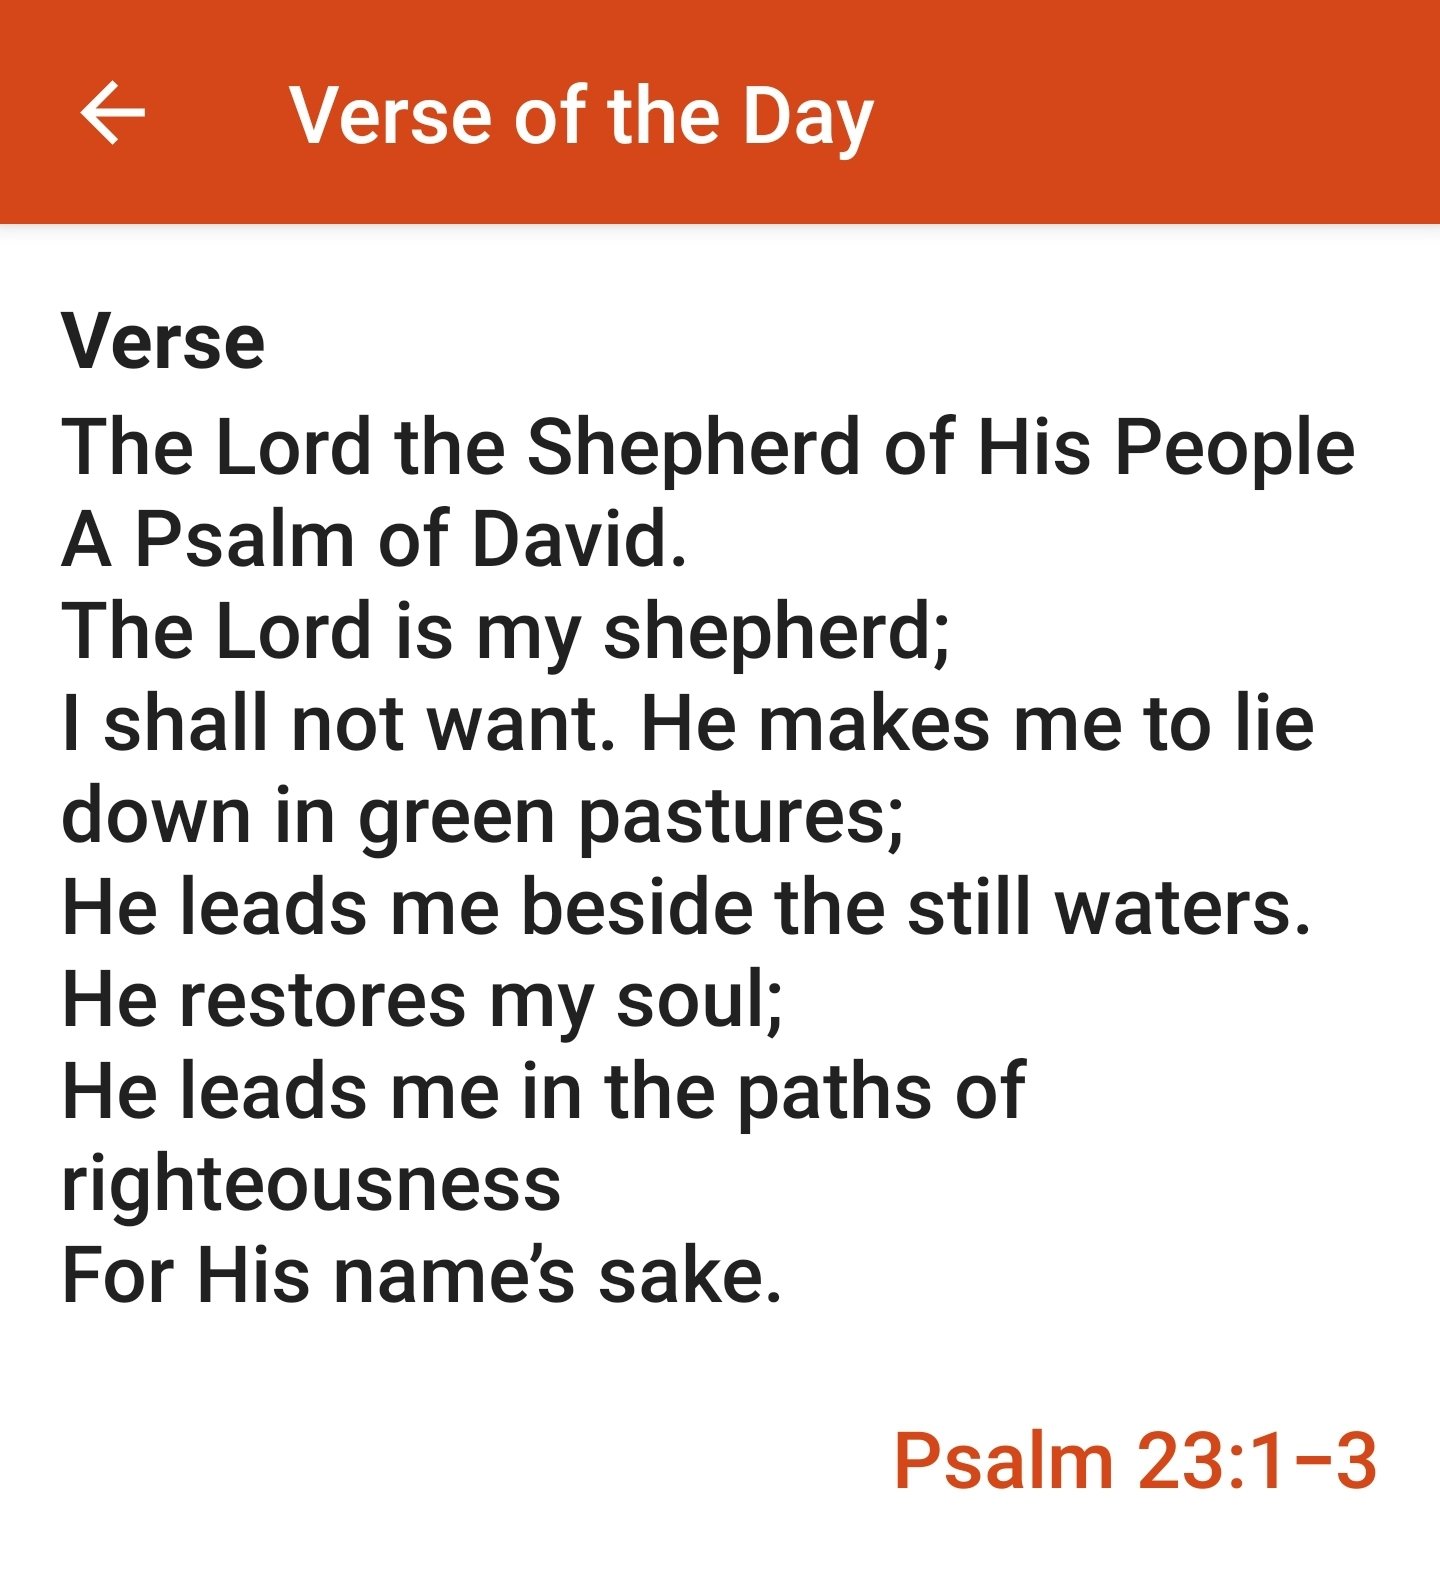 Verse of the Verse The Lord the Shepherd of His People A Psalm of David. The Lord is my shepherd; shall not want: He makes me to lie down in green pastures; He leads me beside the still waters: He restores soul; He leads me in the of righteousness For His names sake: Psalm 23:1-3 Day my paths